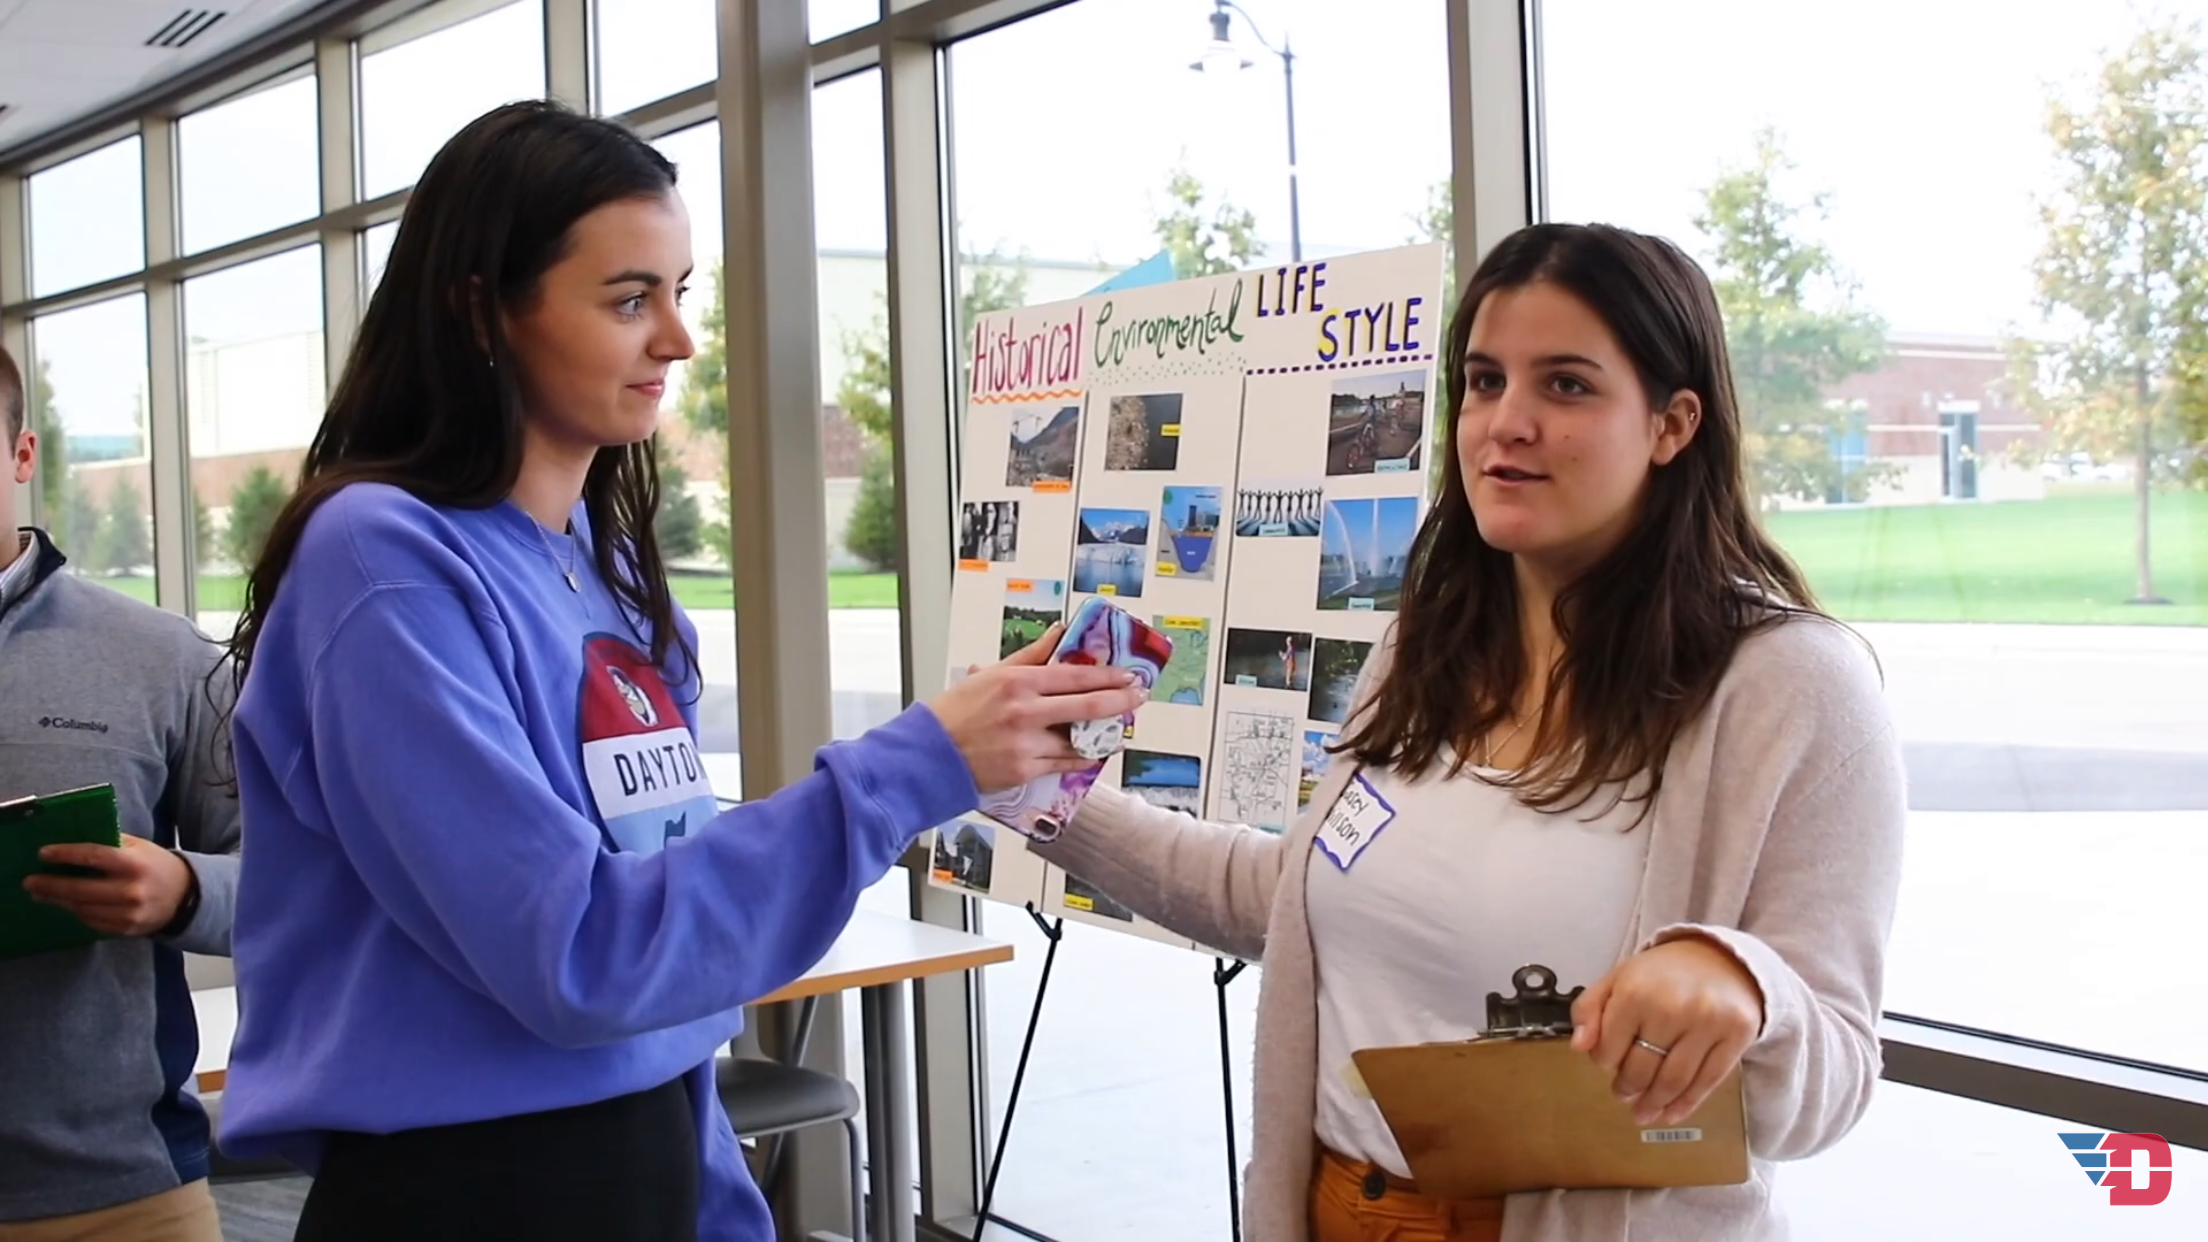 Image of a student interviewing another student with a presentation board in the background.